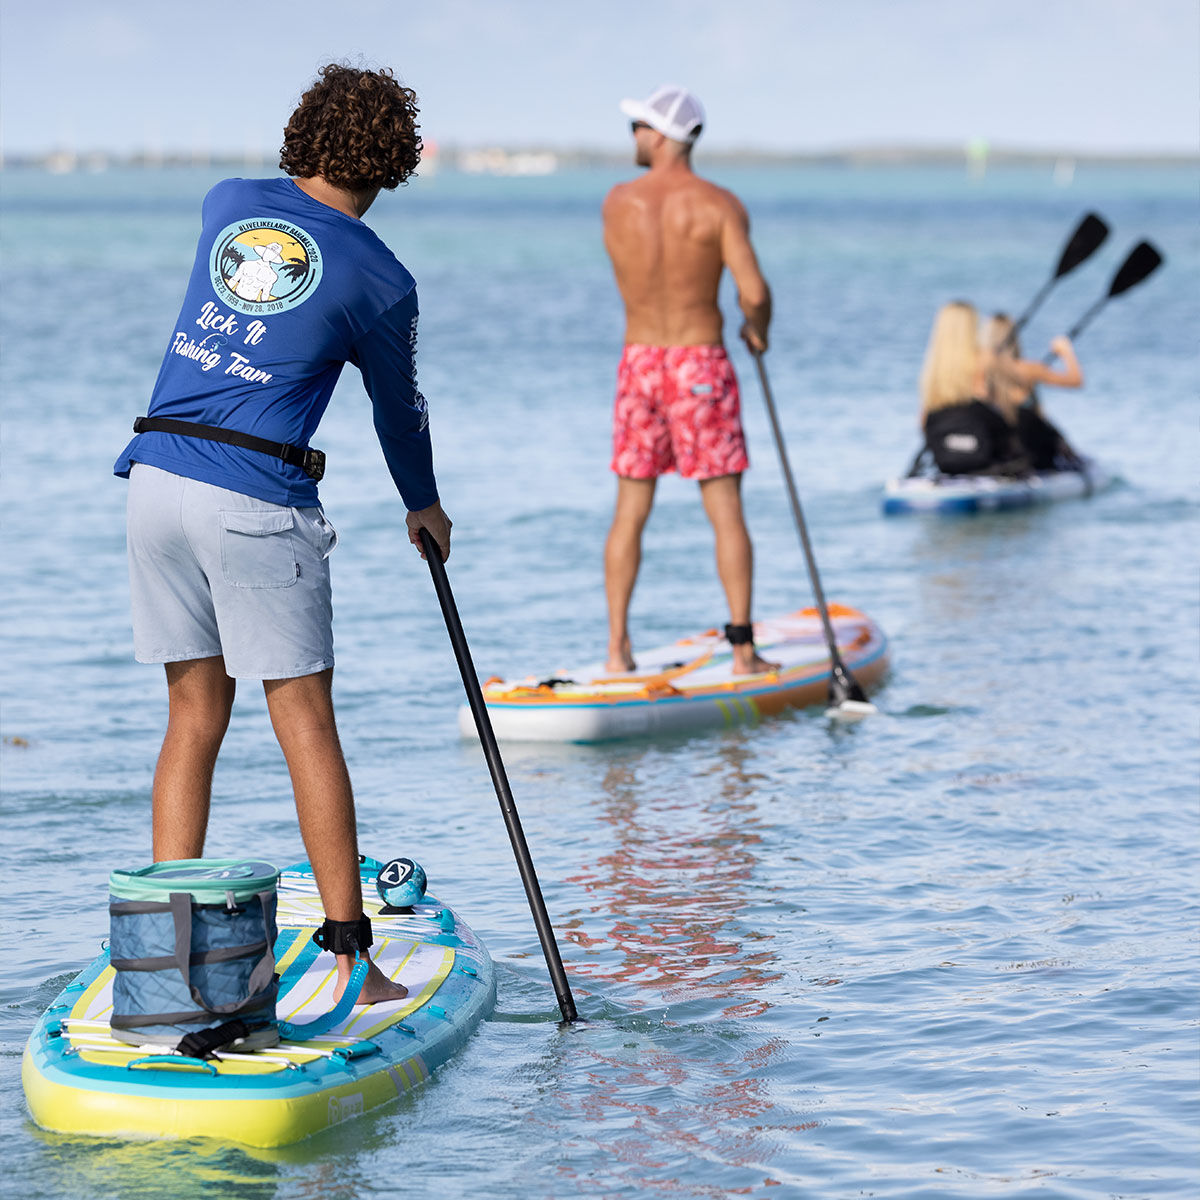 Man outside on an inflatable stand up paddleboard with a cooler